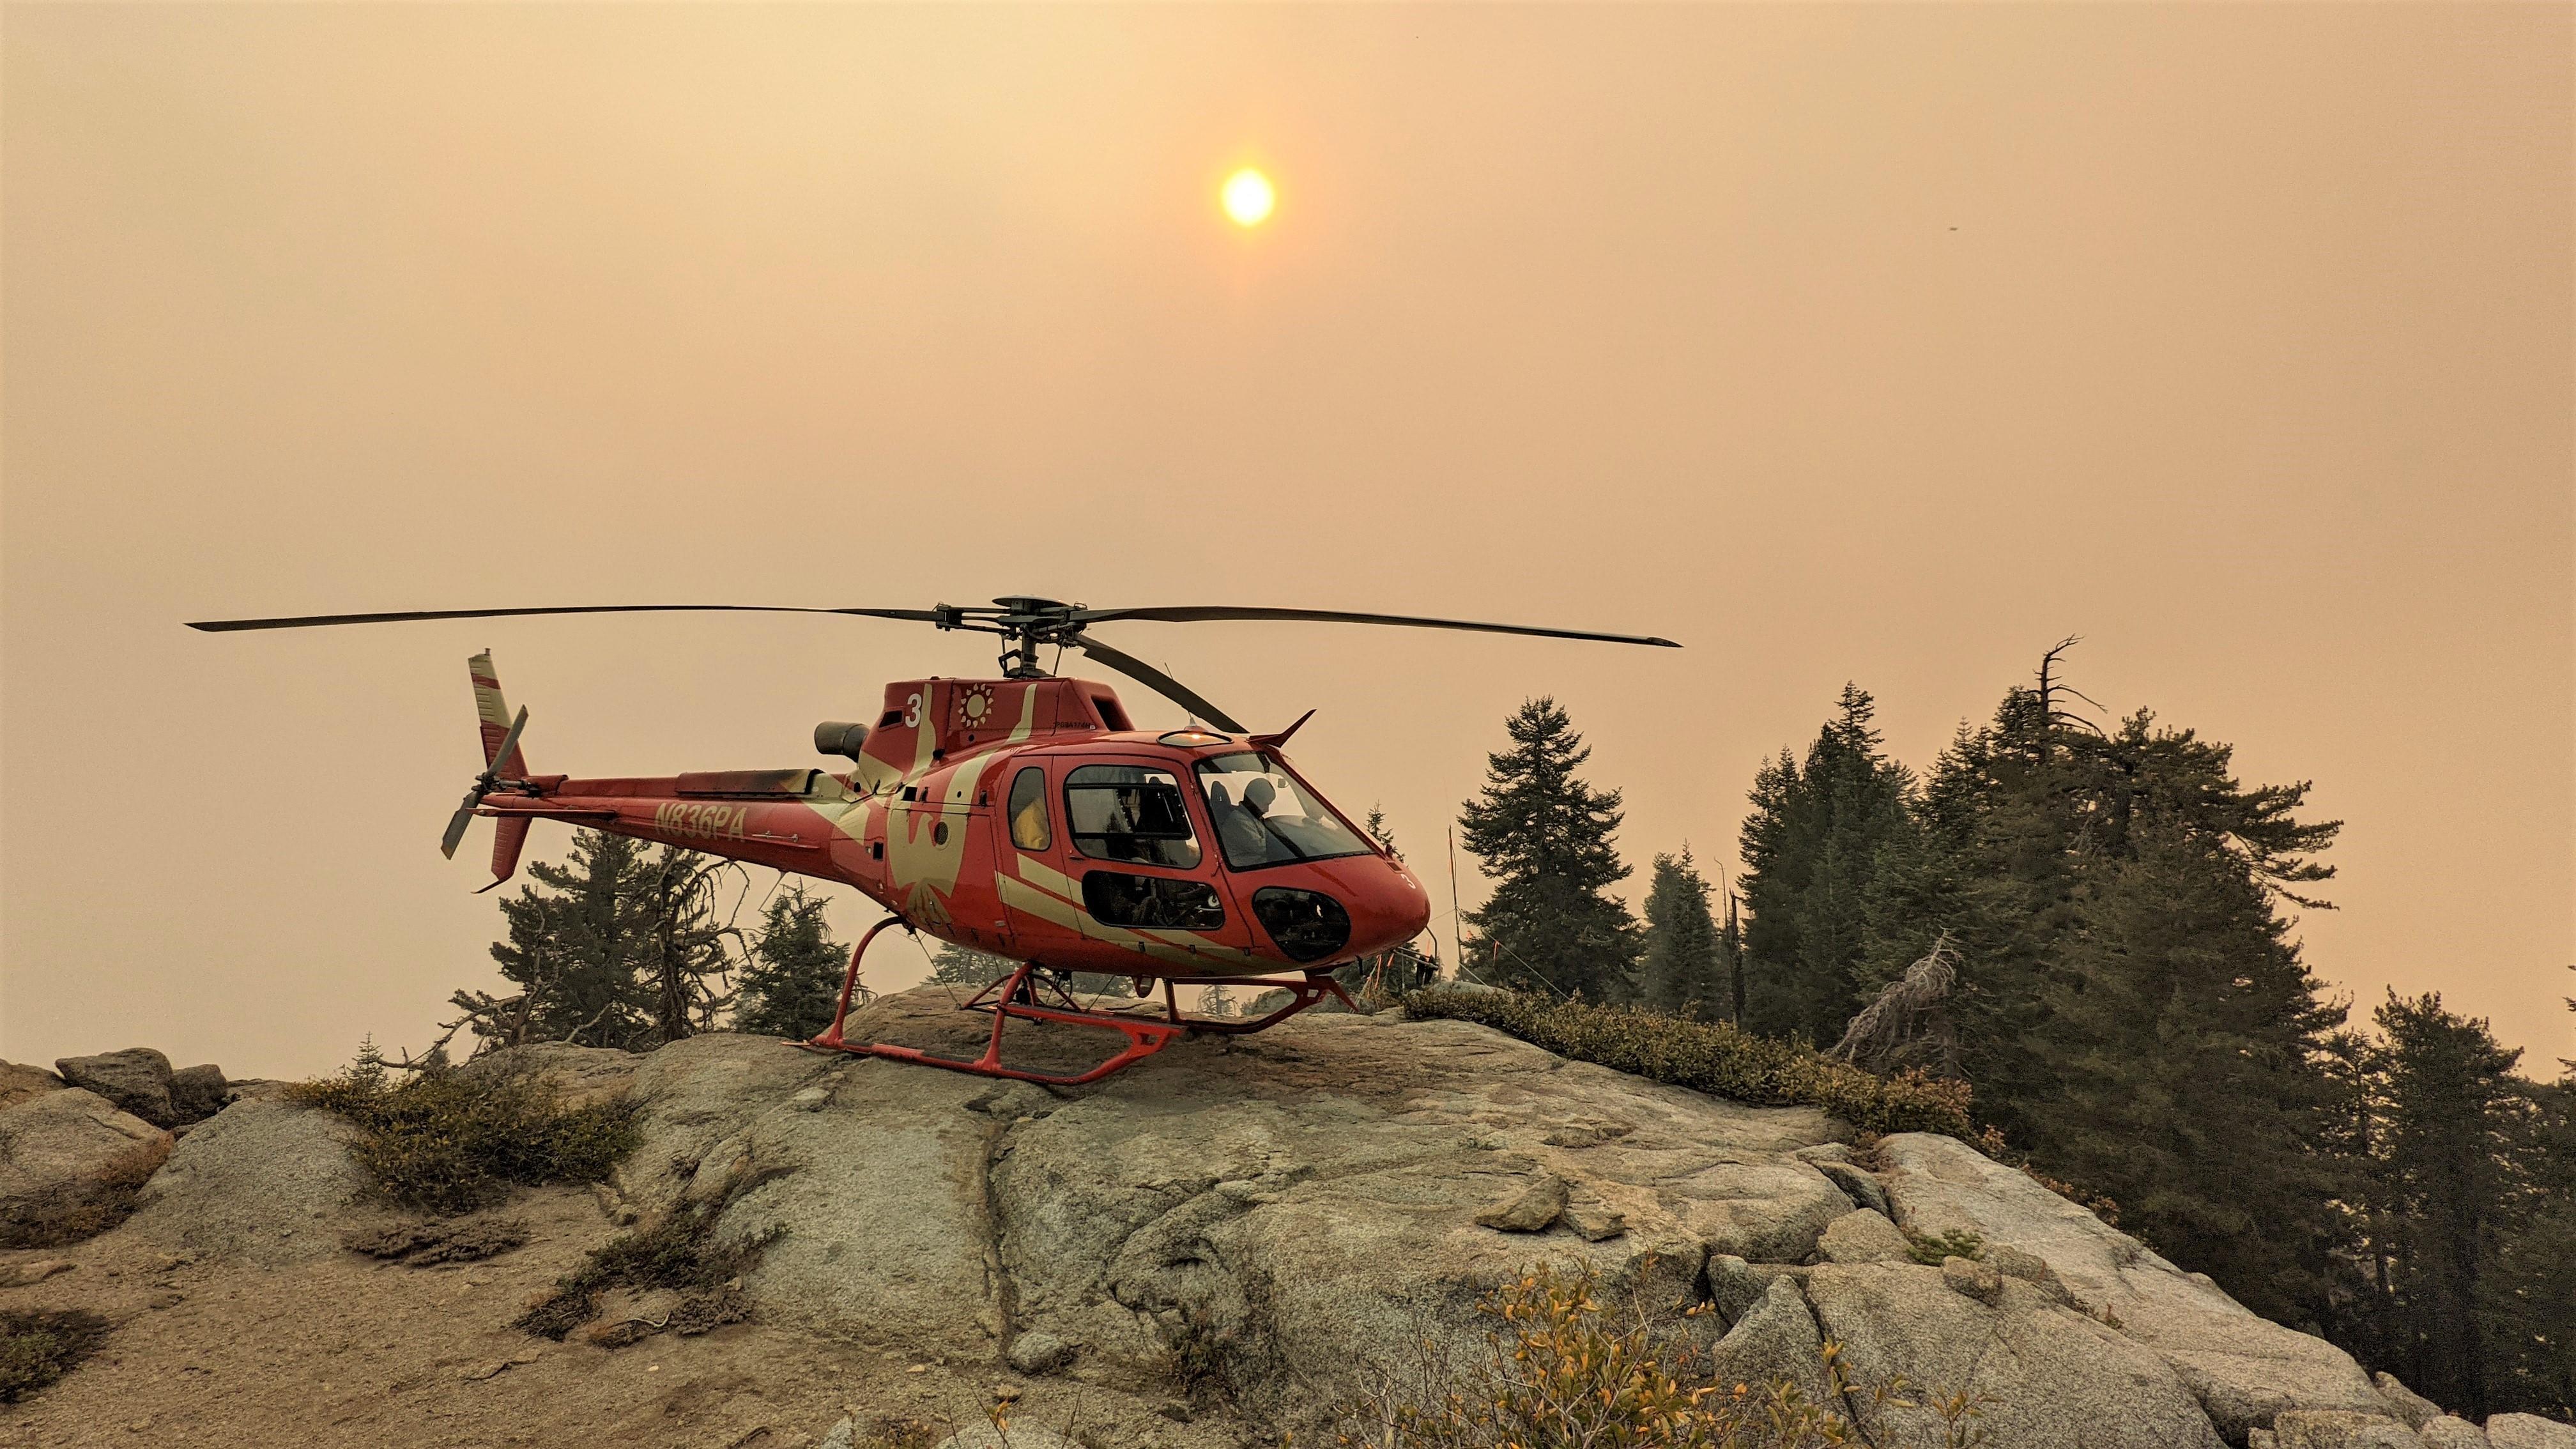 A red helicopter sits on rocks with a smoky sky and red sun